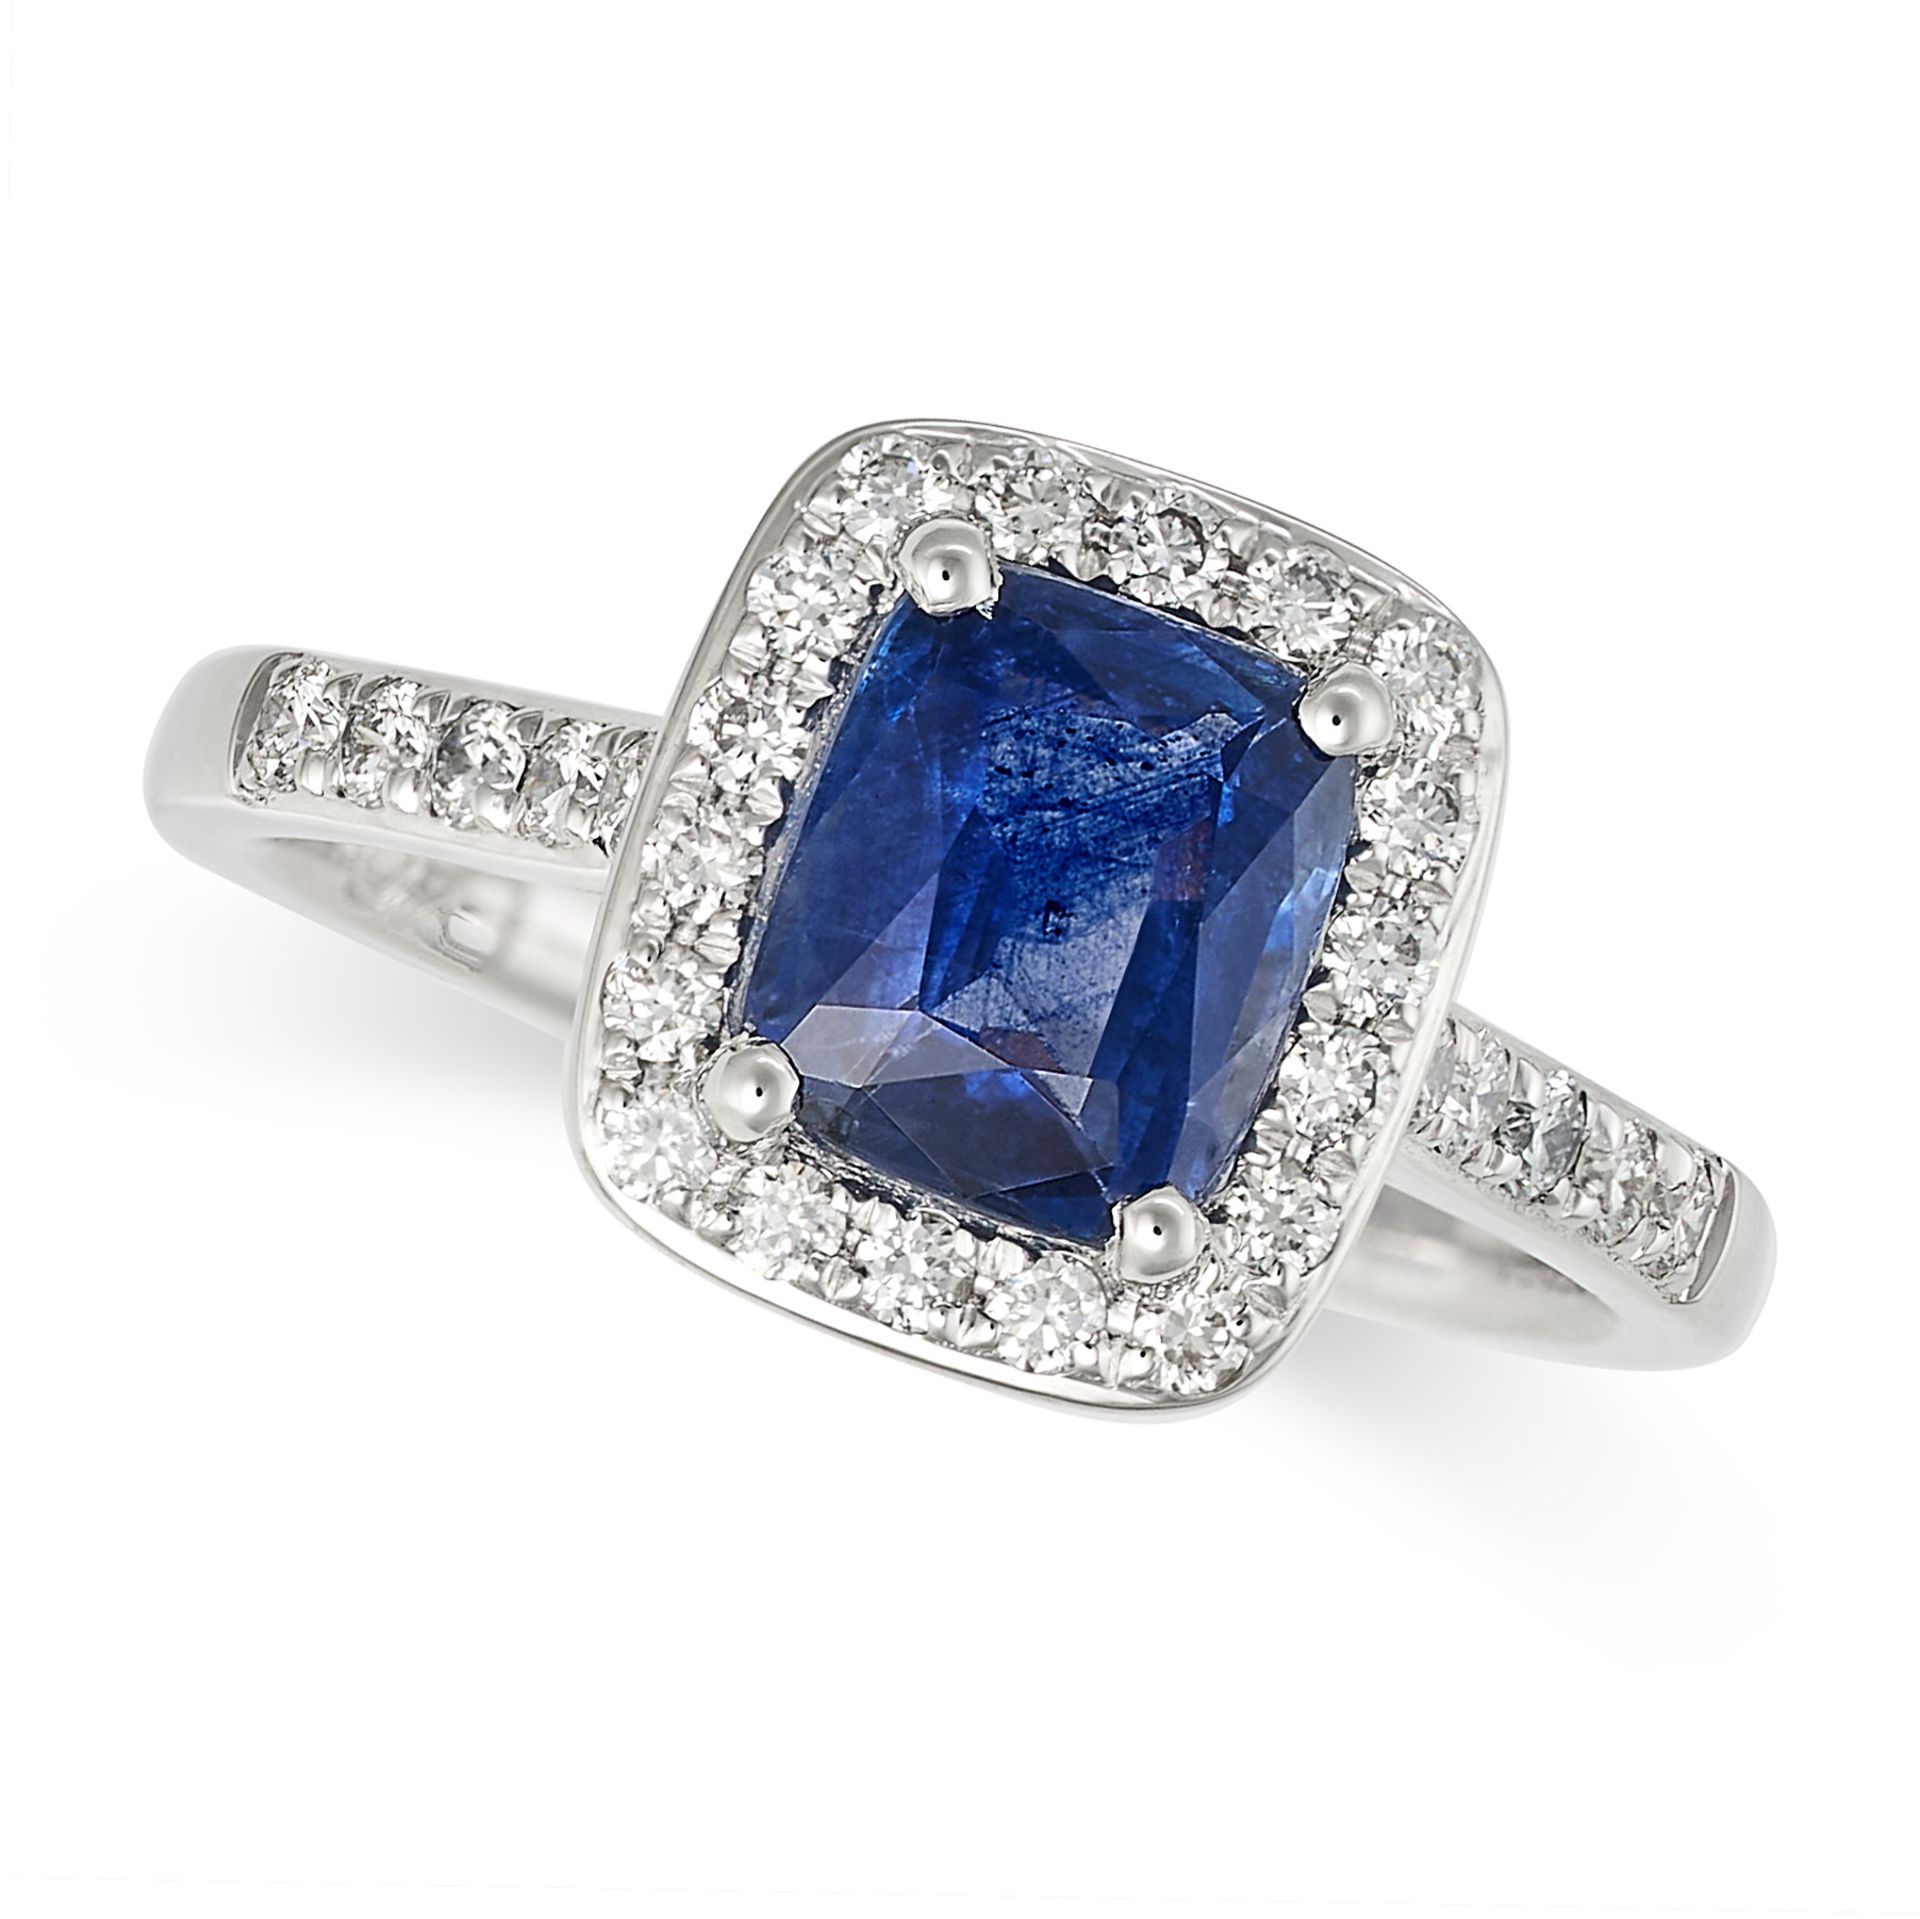 A SAPPHIRE AND DIAMOND CLUSTER RING in platinum, set with a cushion cut sapphire of 2.03 carats i...